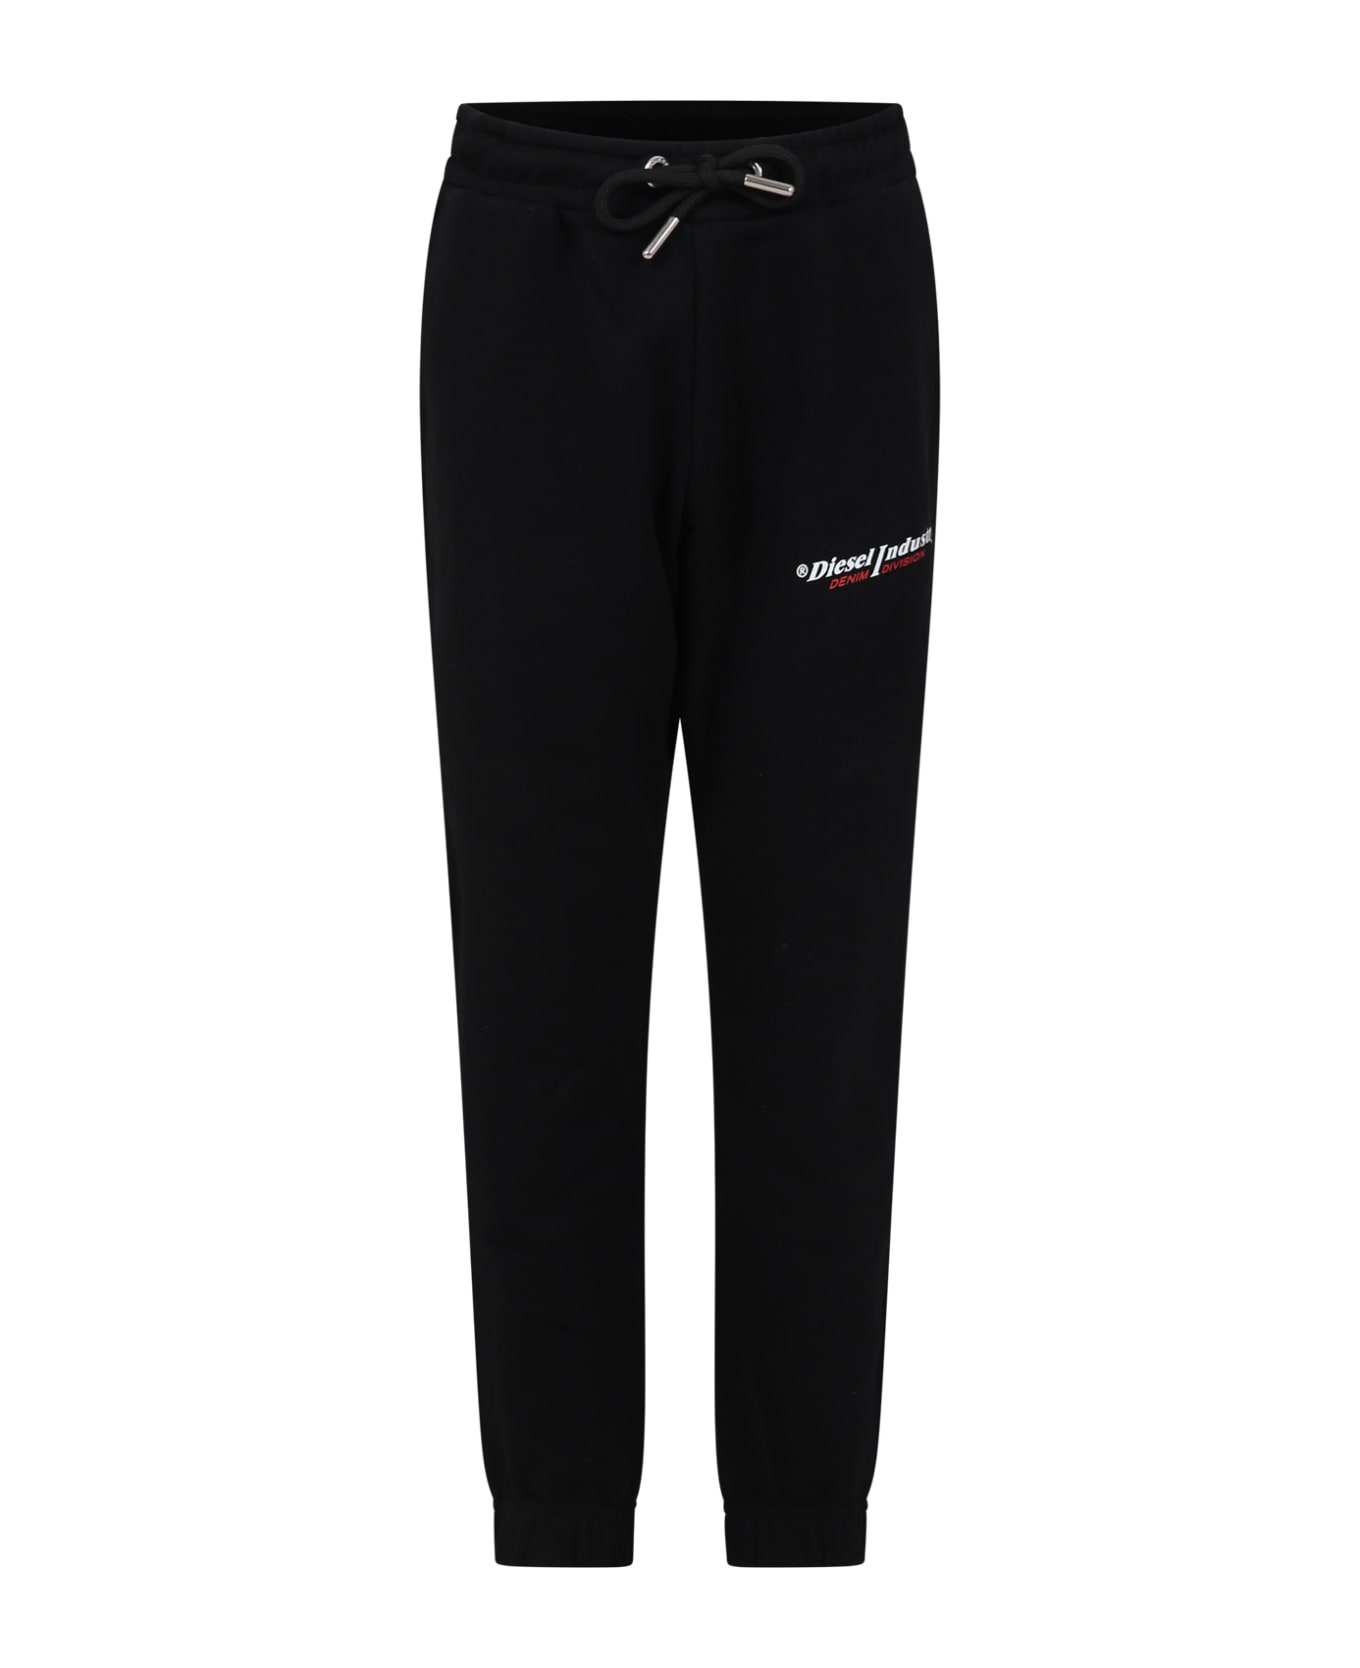 Diesel Black Trousers For Kids With Logo - Black